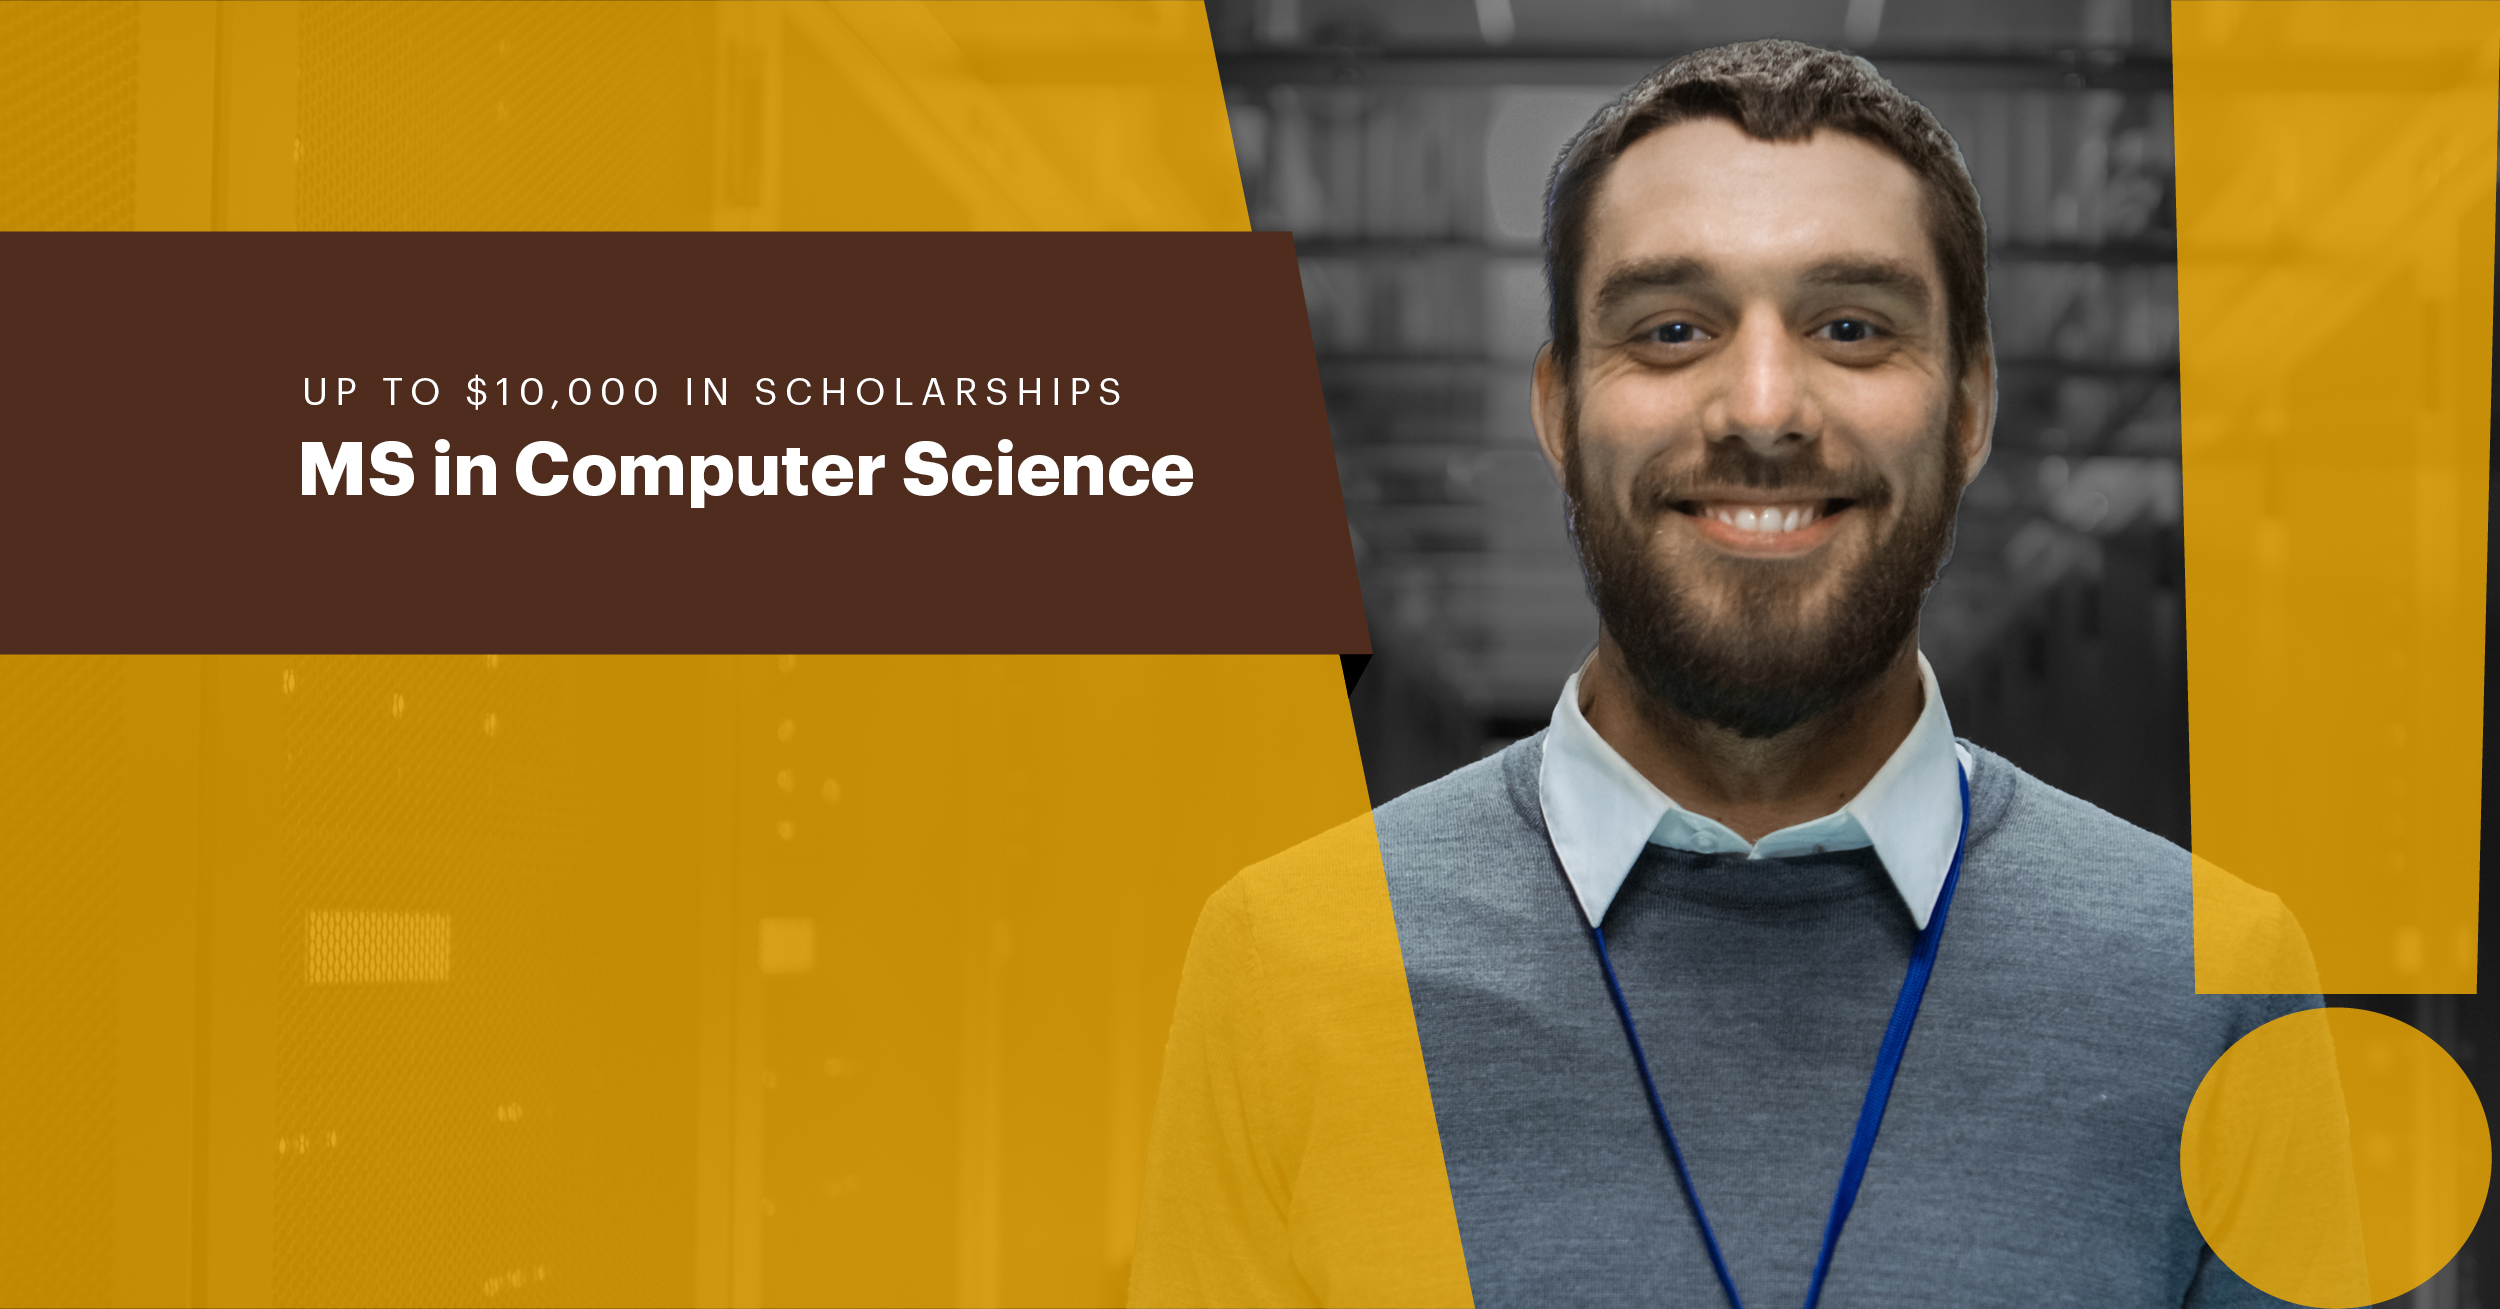 Up to $10,000 in scholarships MS in Computer Science